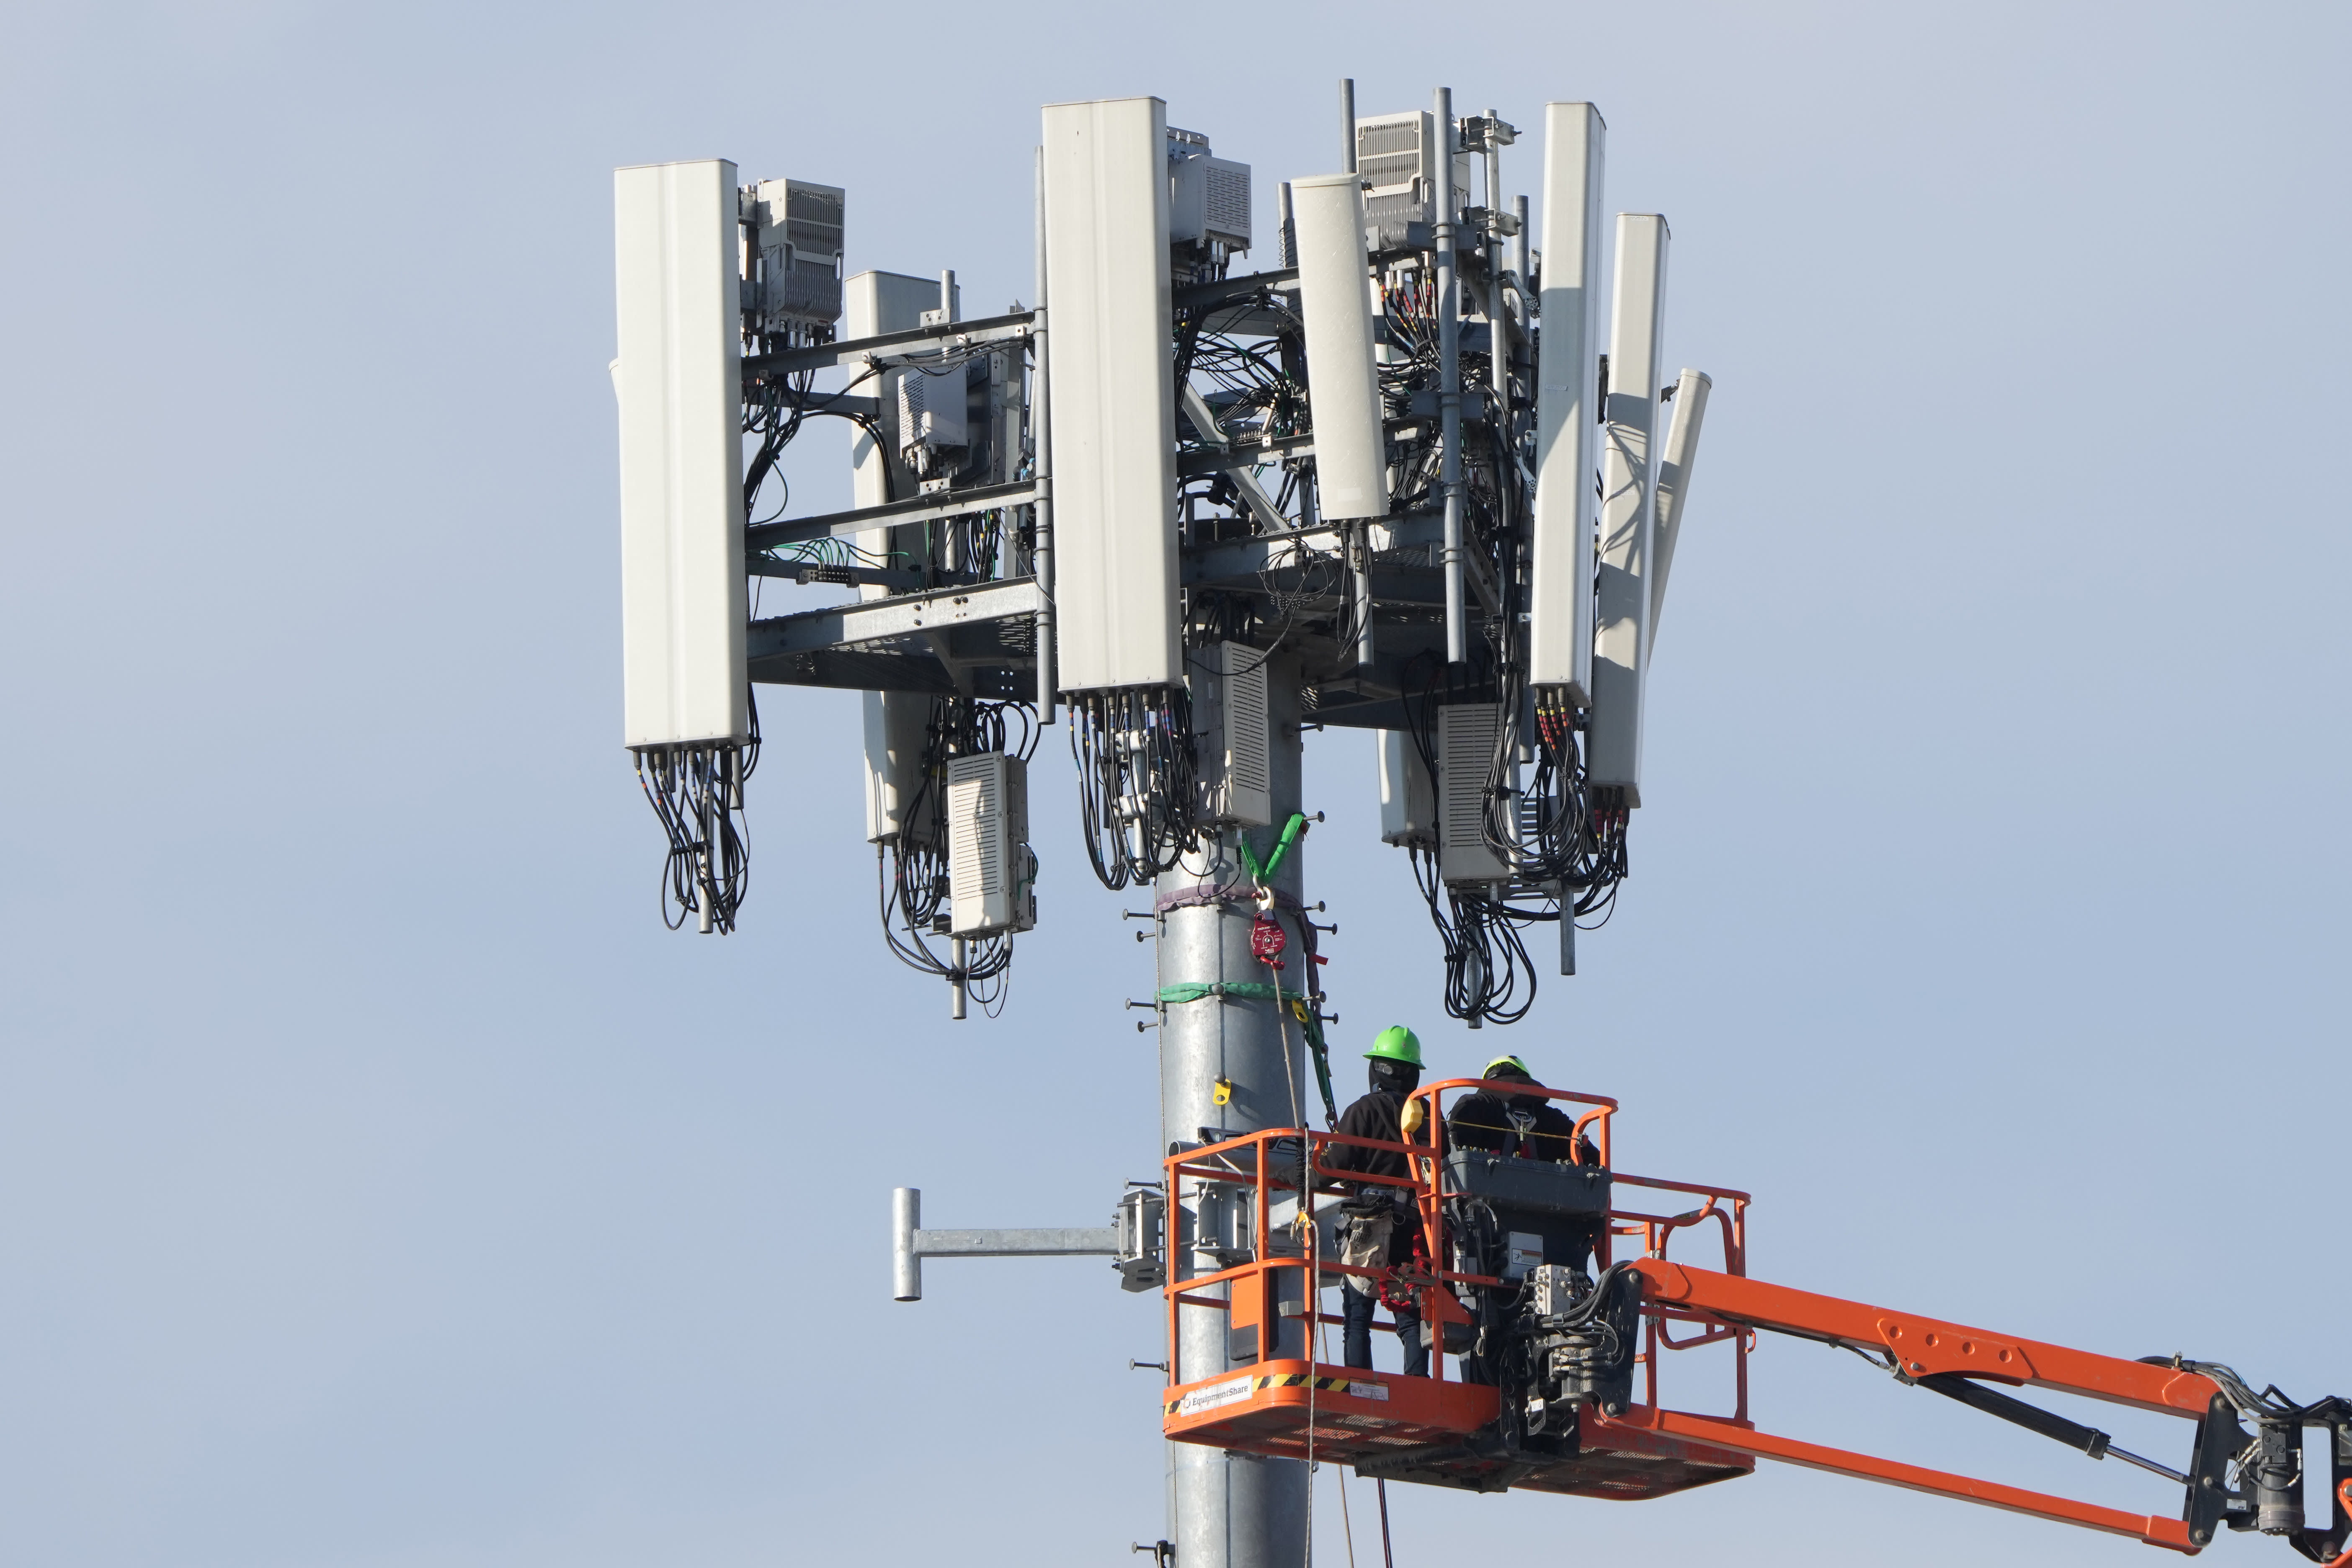 107000107-1642001207485-gettyimages-1237677353-5G_CELL_TOWERS Verizon, AT&T Delay Some 5G Service Over Airlines' Concerns